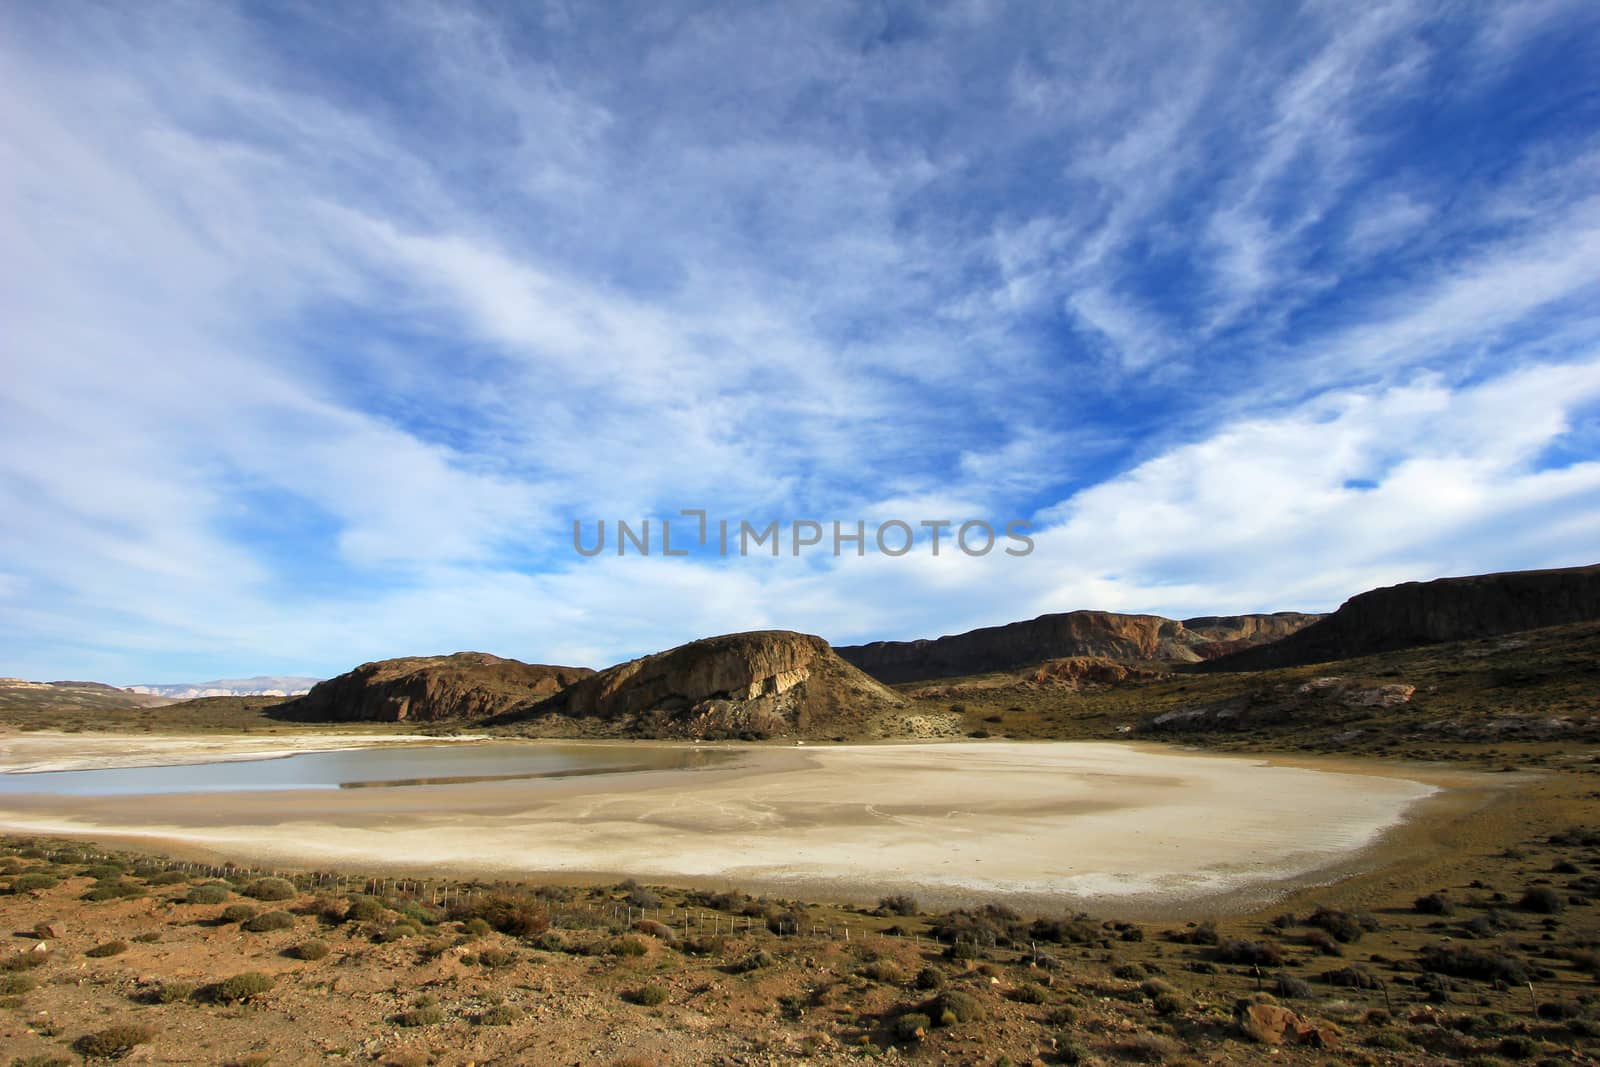 Beautiful landscape near Paso Roballos, Argentina and Chile by cicloco